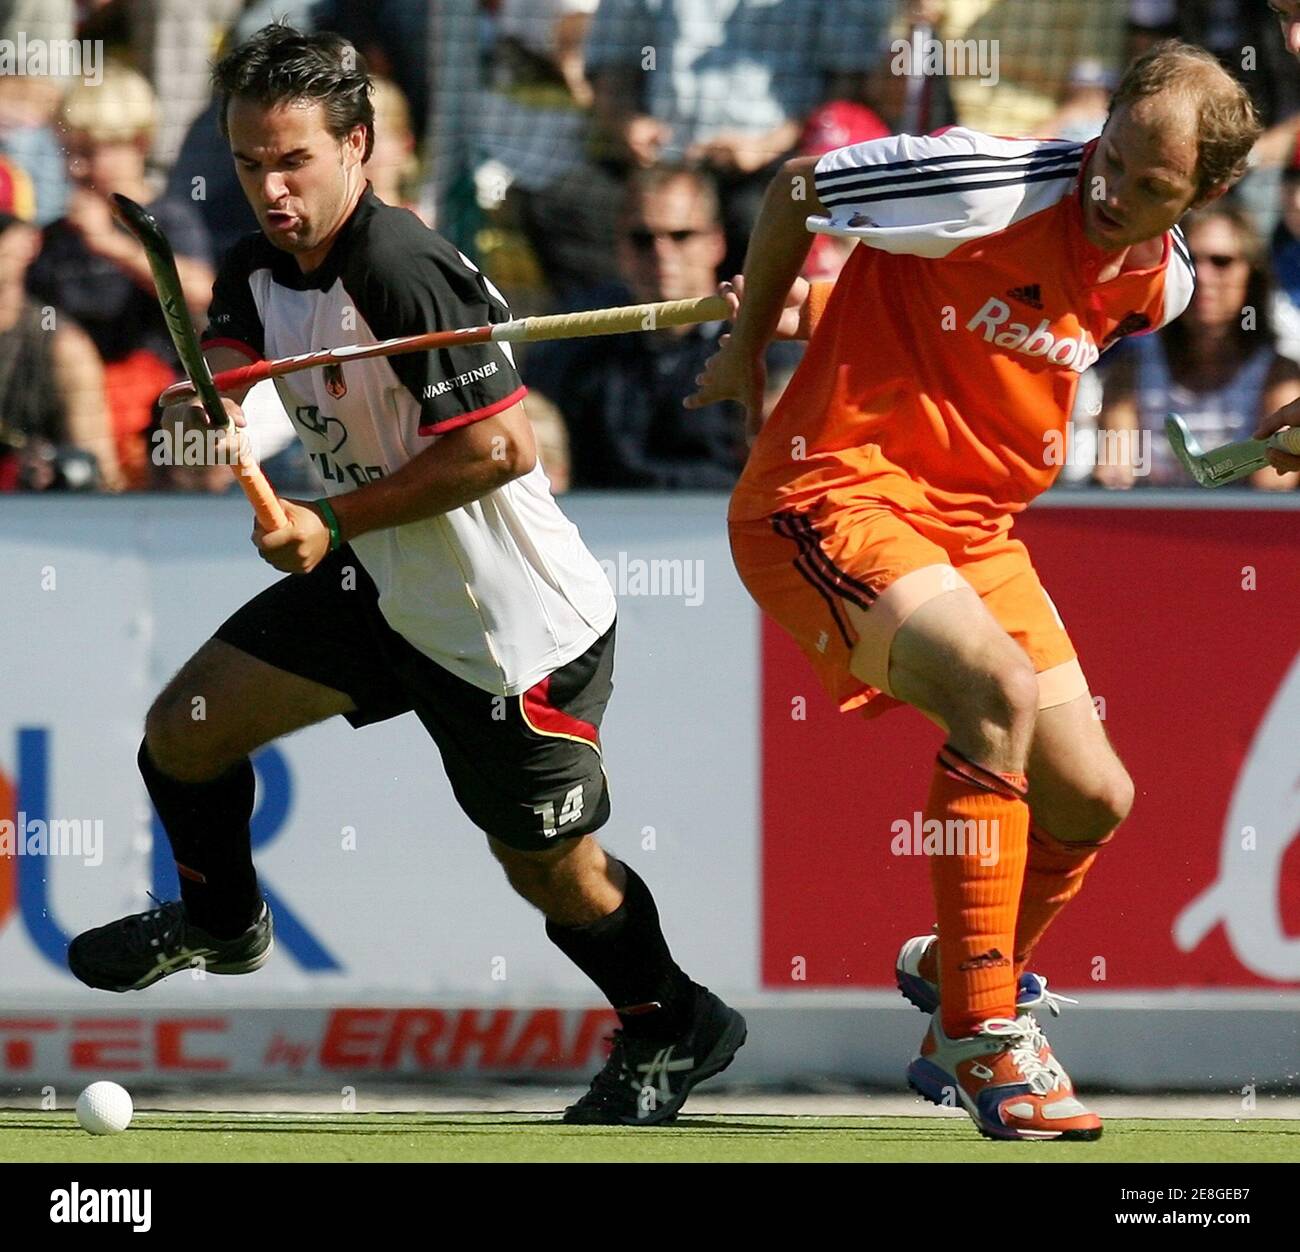 Germany's Tibor Weissenborn (L) fights for the ball with Netherlands' Teun de Nooijer during their Men's Field Hockey World Cup match at the Warsteiner Hockey Park stadium in Moenchengladbach September 9, 2006. REUTERS/Pascal Lauener  (GERMANY) Stock Photo